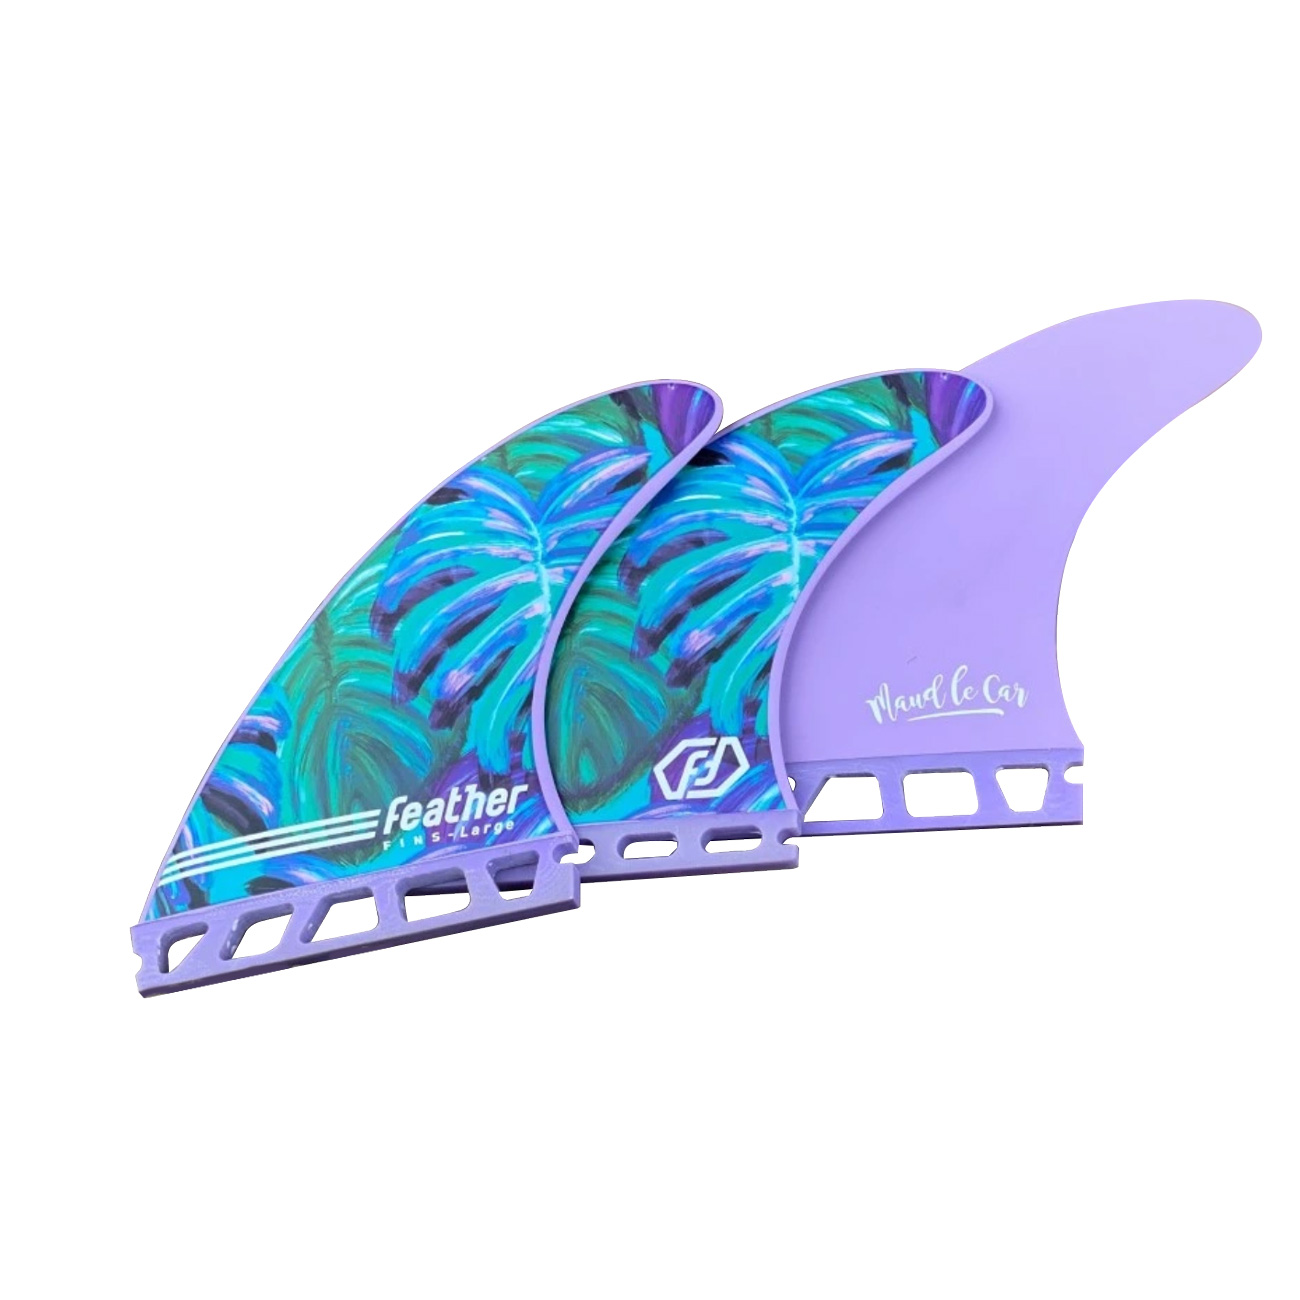 Feather Fins Maud Le Car Athlete Series Single Tab – Thruster 3 fins